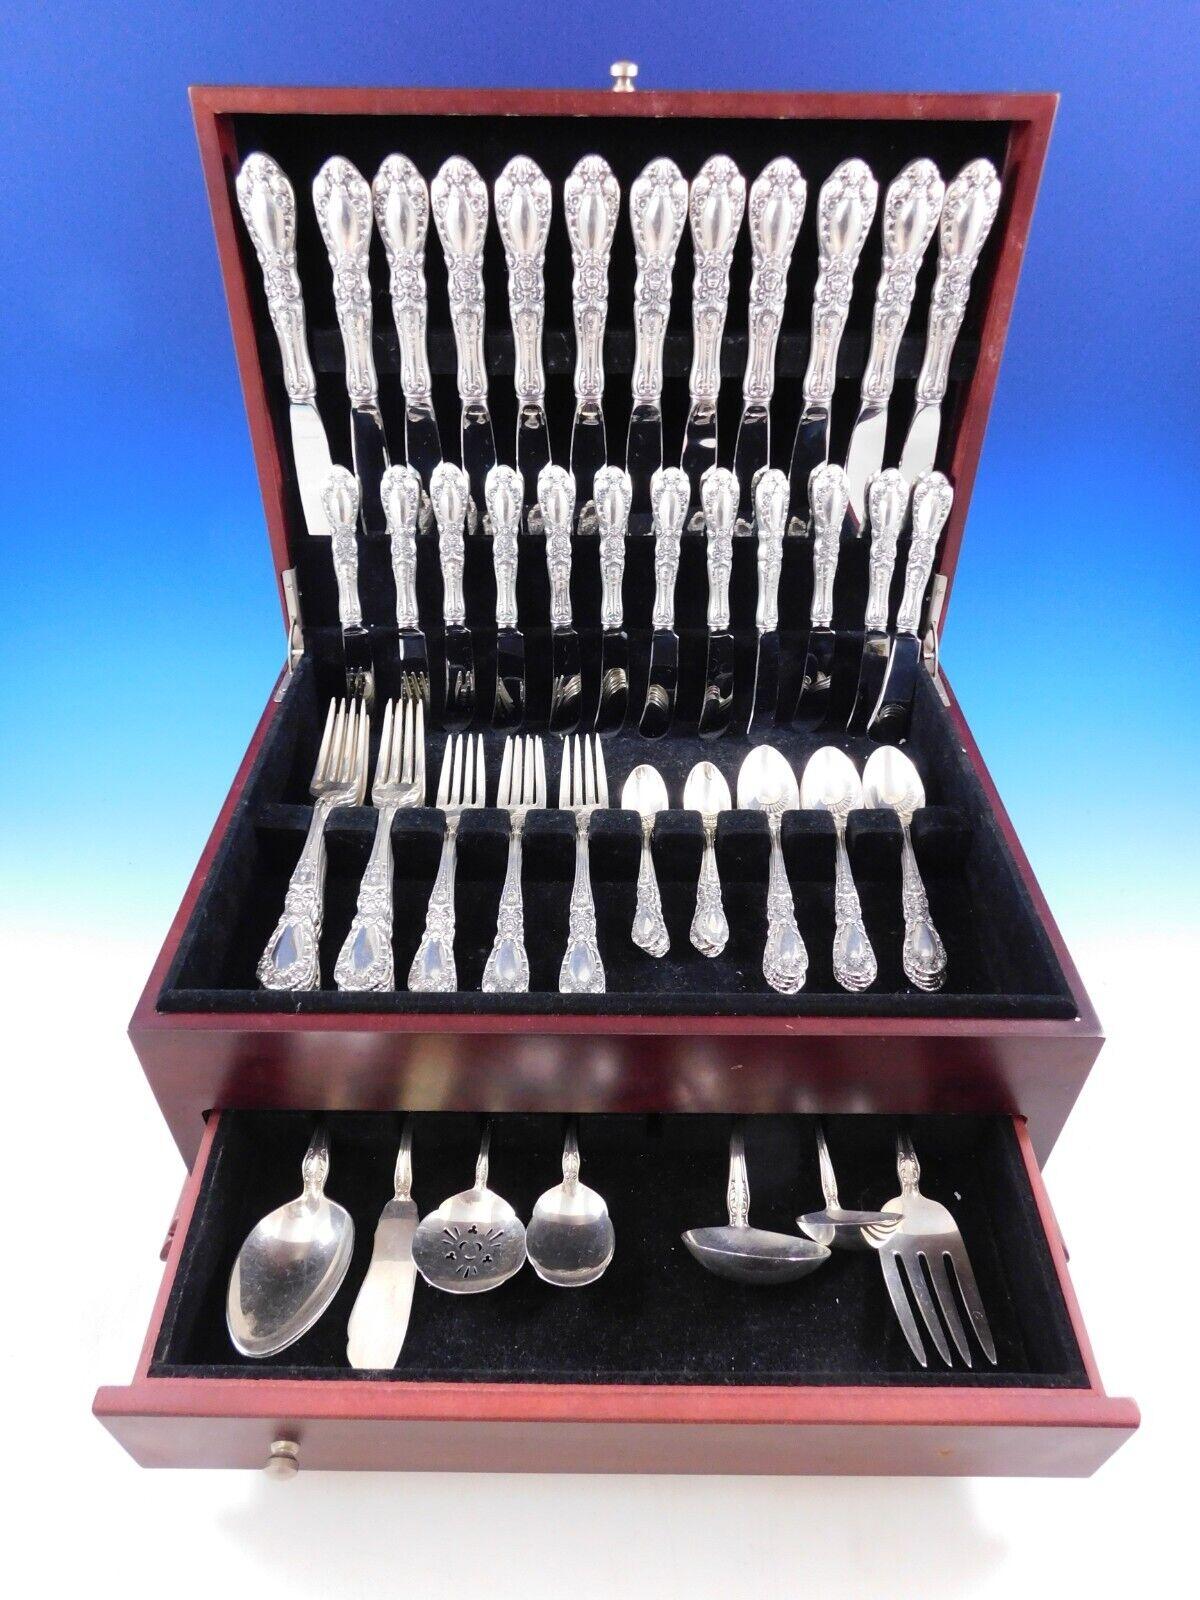 Dinner Size Prince Eugene by Alvin sterling silver flatware set, 80 pieces. The dinner fork and knife in this pattern are large and impressive. This set includes:

12 dinner size knives, 9 1/2